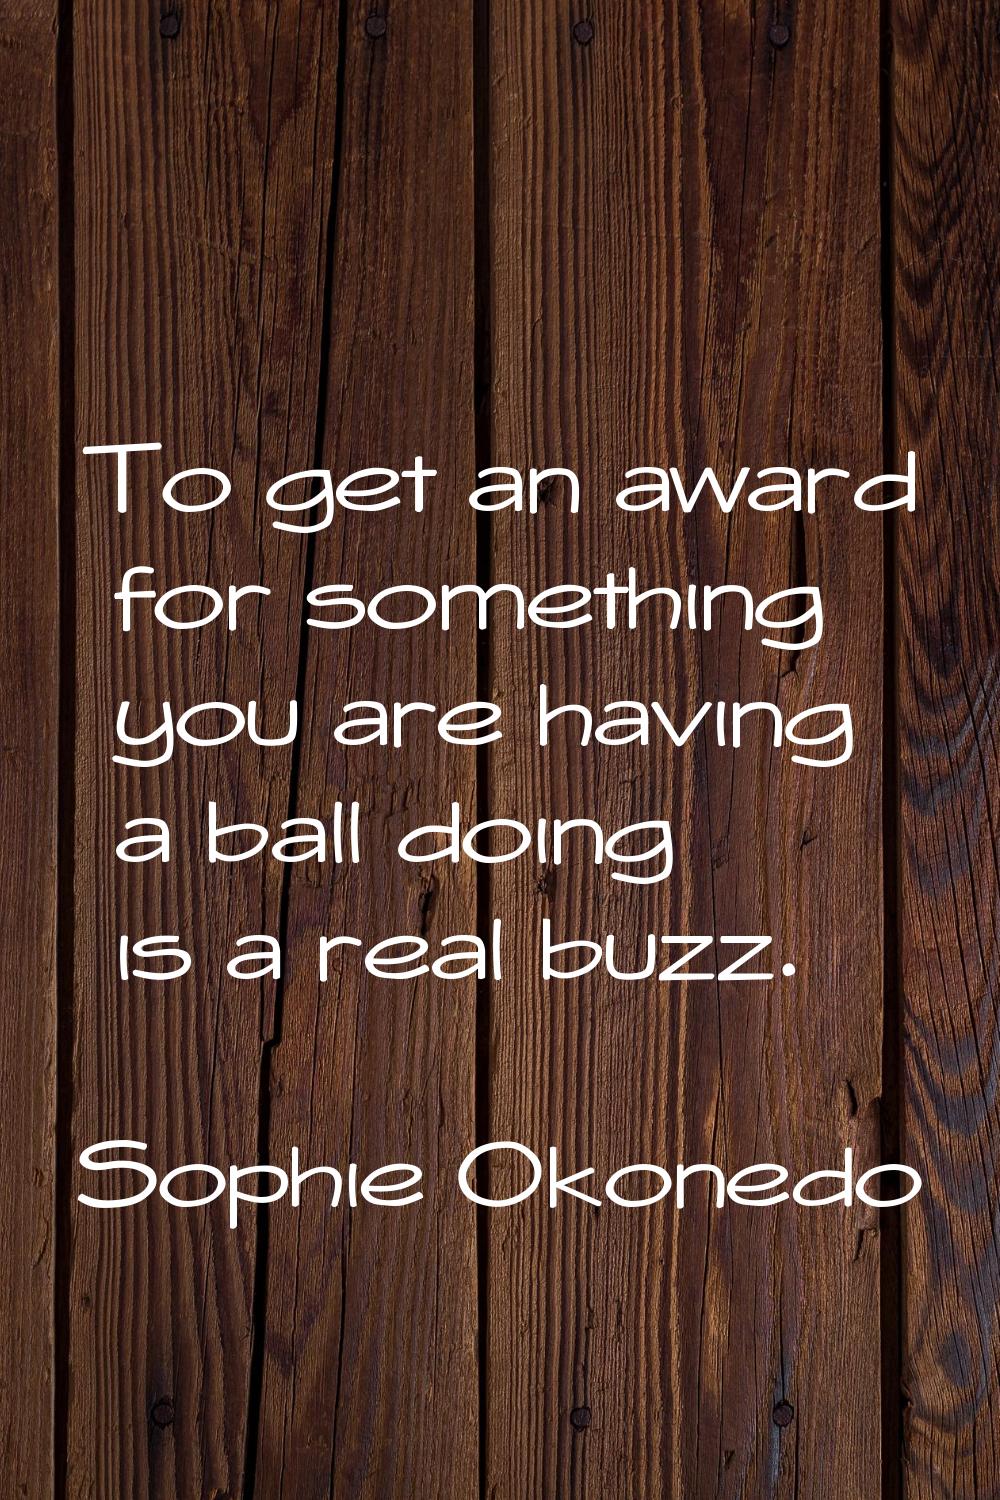 To get an award for something you are having a ball doing is a real buzz.